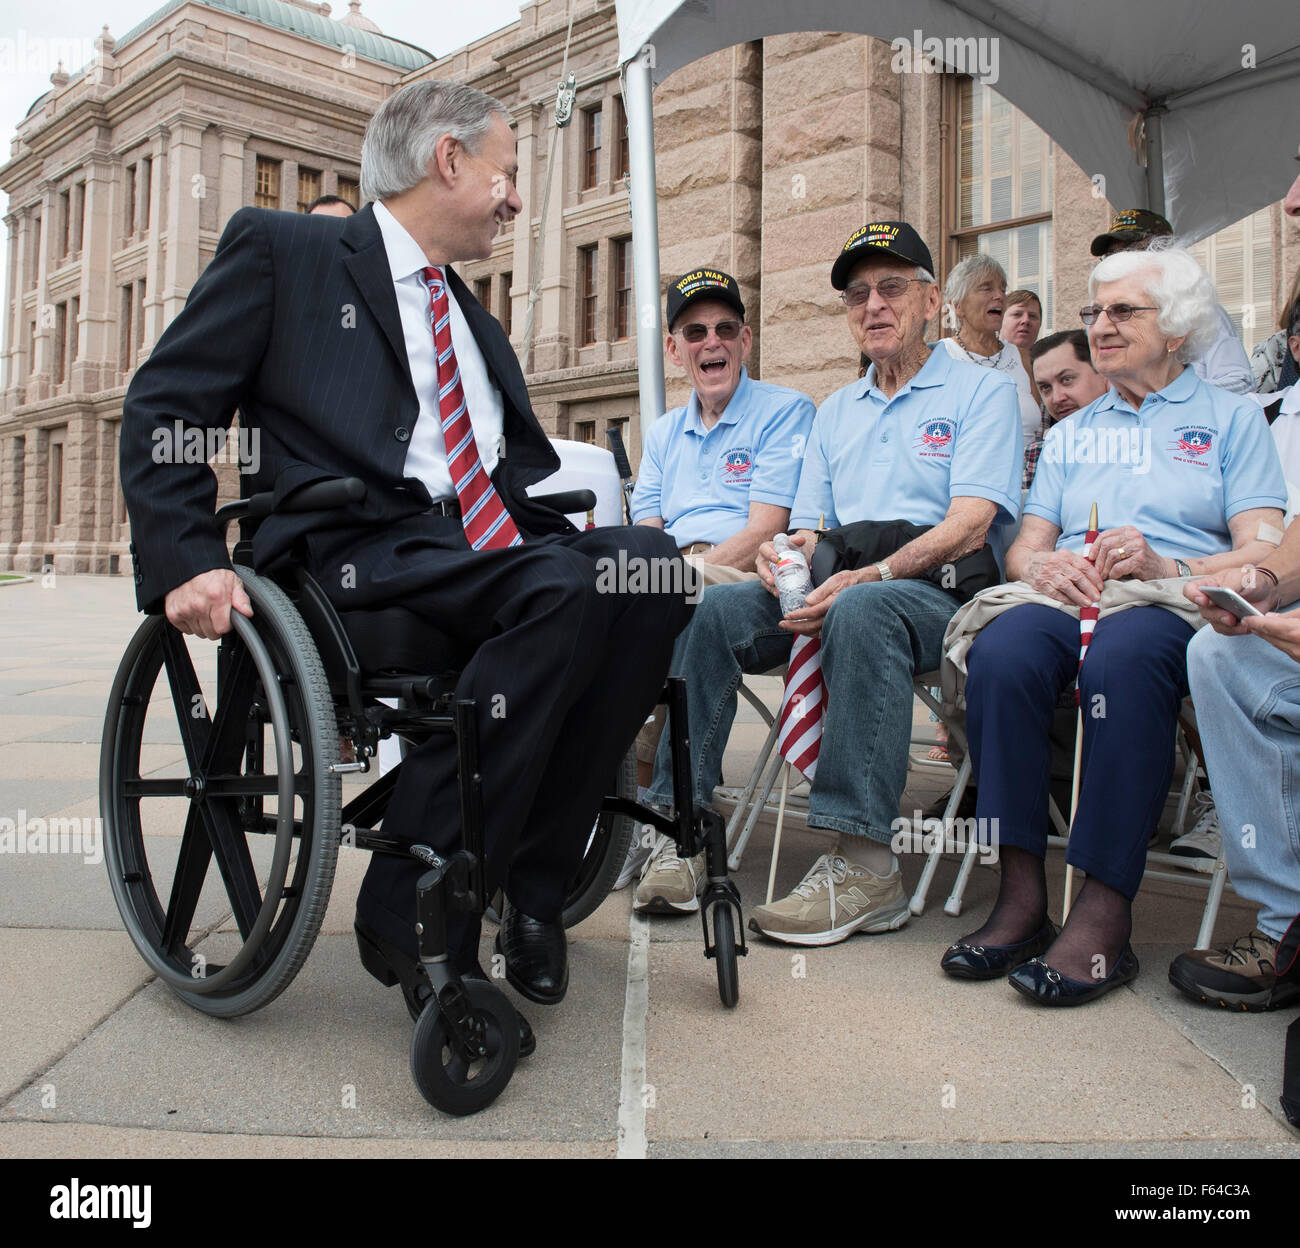 Austin, Texas USA November 11, 2015: Texas Gov. Greg Abbott (l) greets WWII veterans Gene Myers (Navy) and Eugene McClarq (Air Force) during the Veteran's Day parade up Congress Avenue and ceremony at the Texas Capitol. Several thousand Texans lined Congress Avenue to witness military heroes, marching bands and floats in the annual parade. Credit:  Bob Daemmrich/Alamy Live News Stock Photo